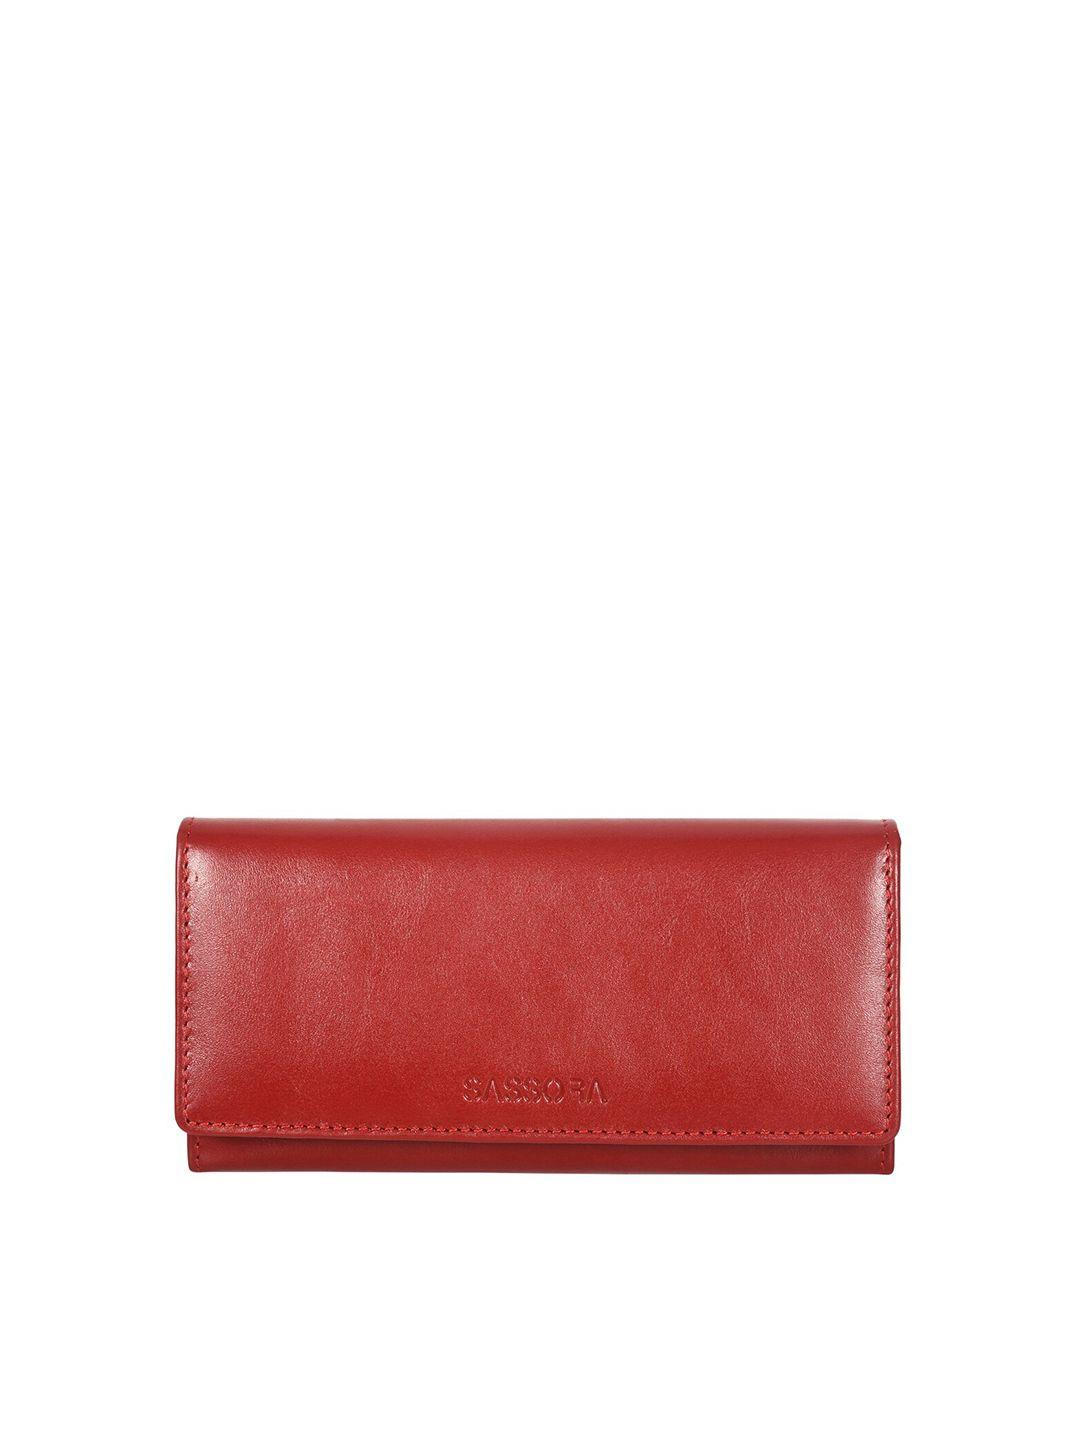 sassora women red leather two fold wallet